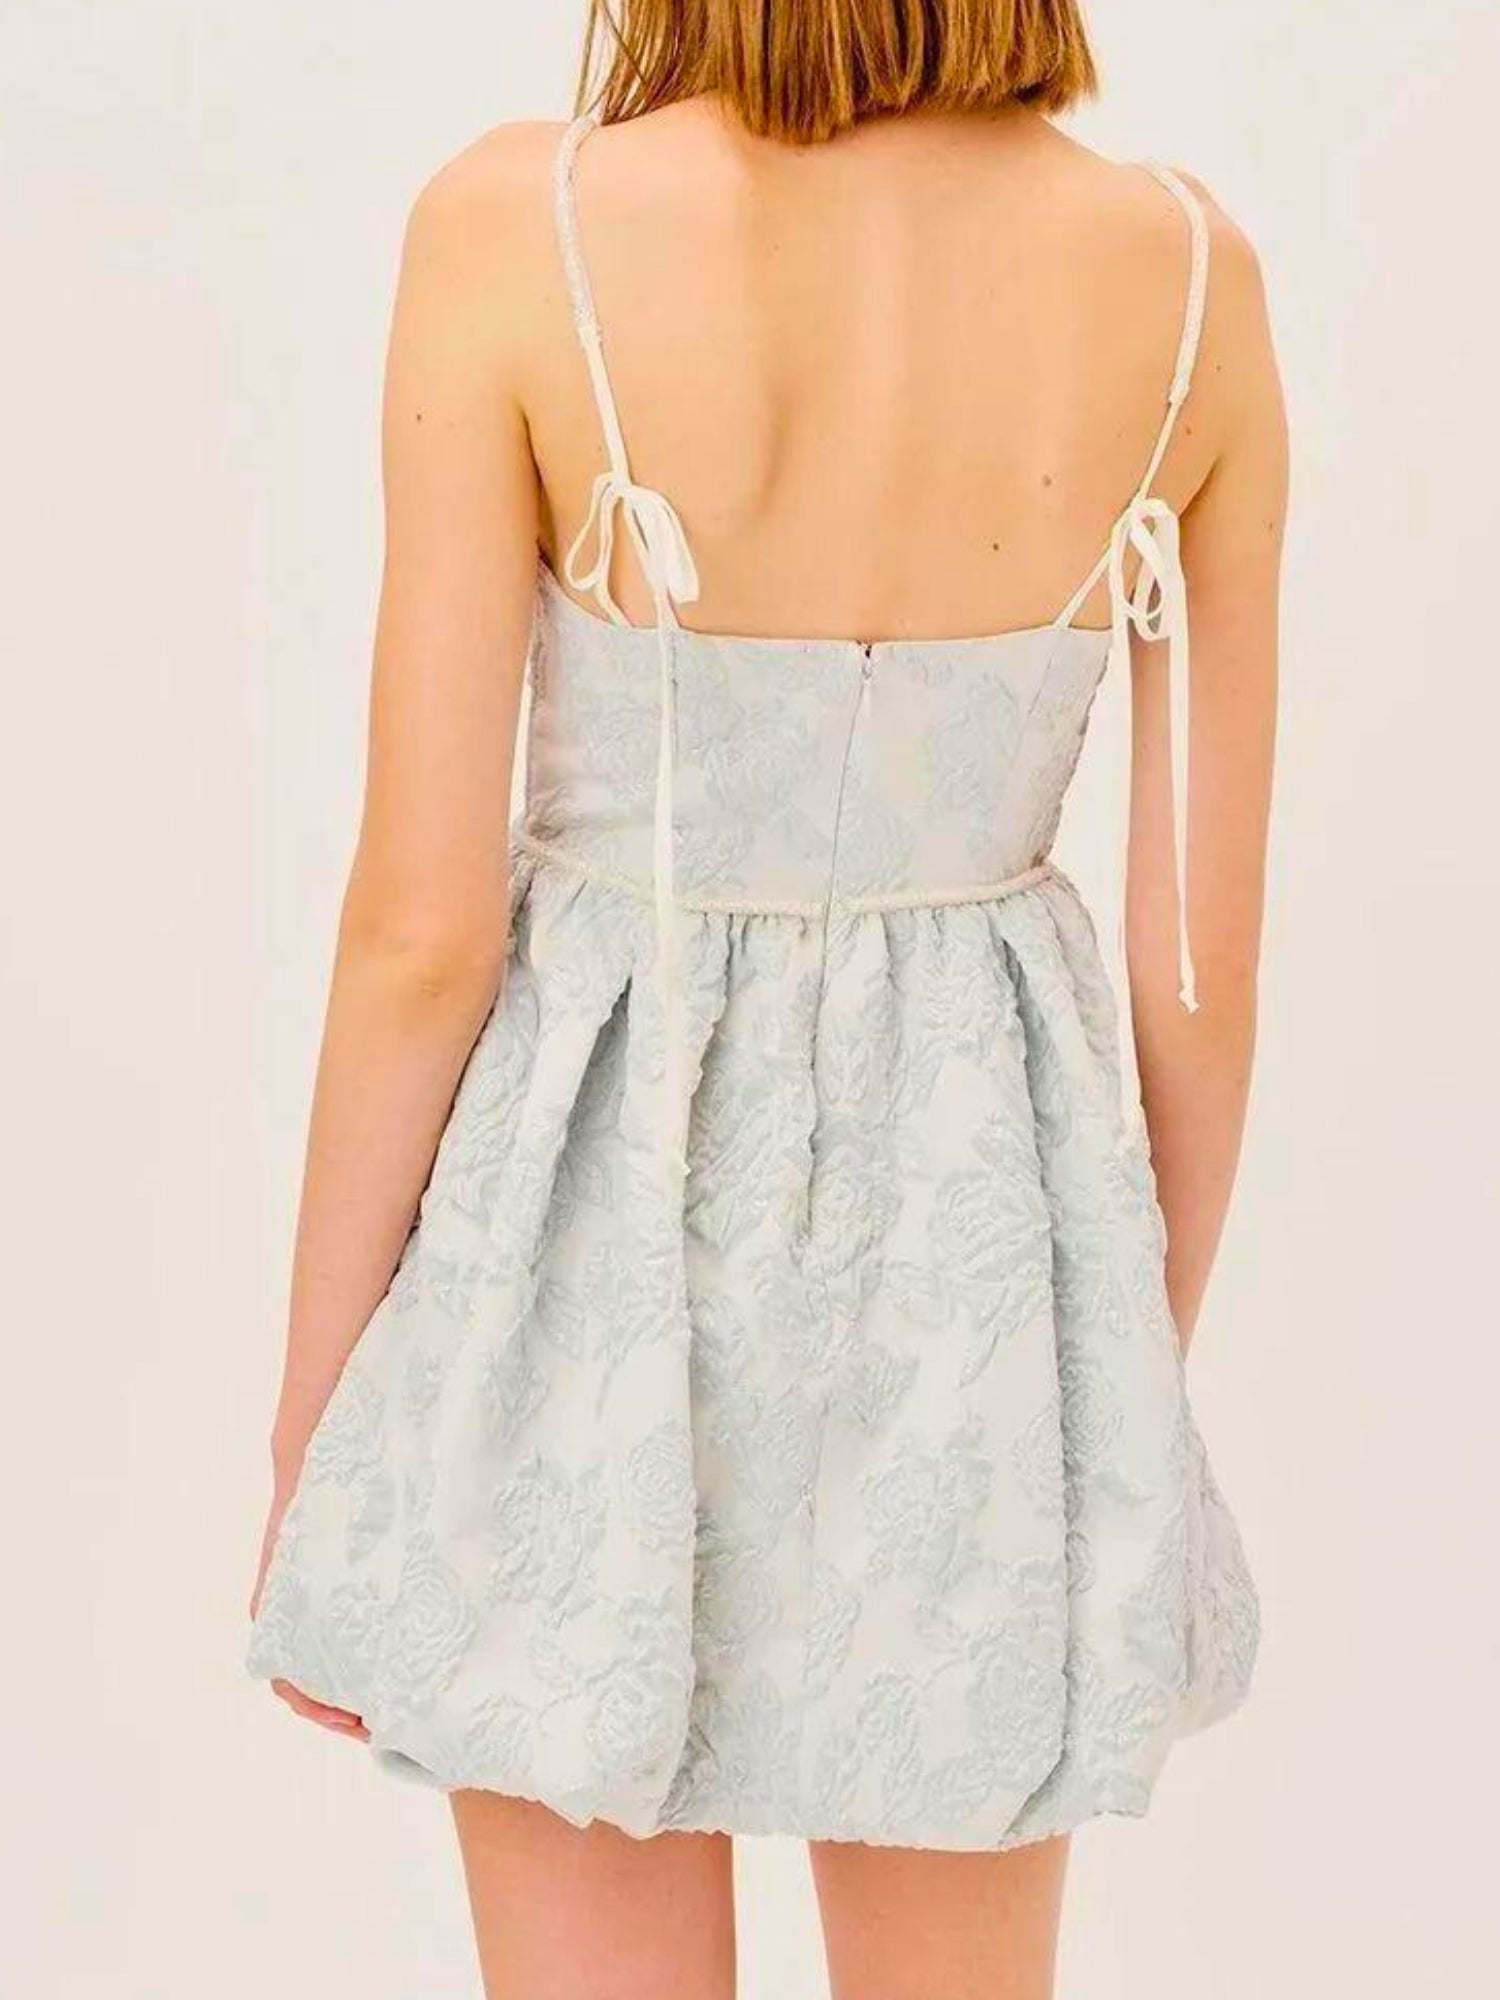 The Lydia Party Dress - The Lydia Party Dress by For Love & Lemons is a mini dress lovers dream! Features the most delicate details, this is a dress that checks all the boxes for a fairytale wardrobe. Made of a light blue and sliver jacquard fabric, this